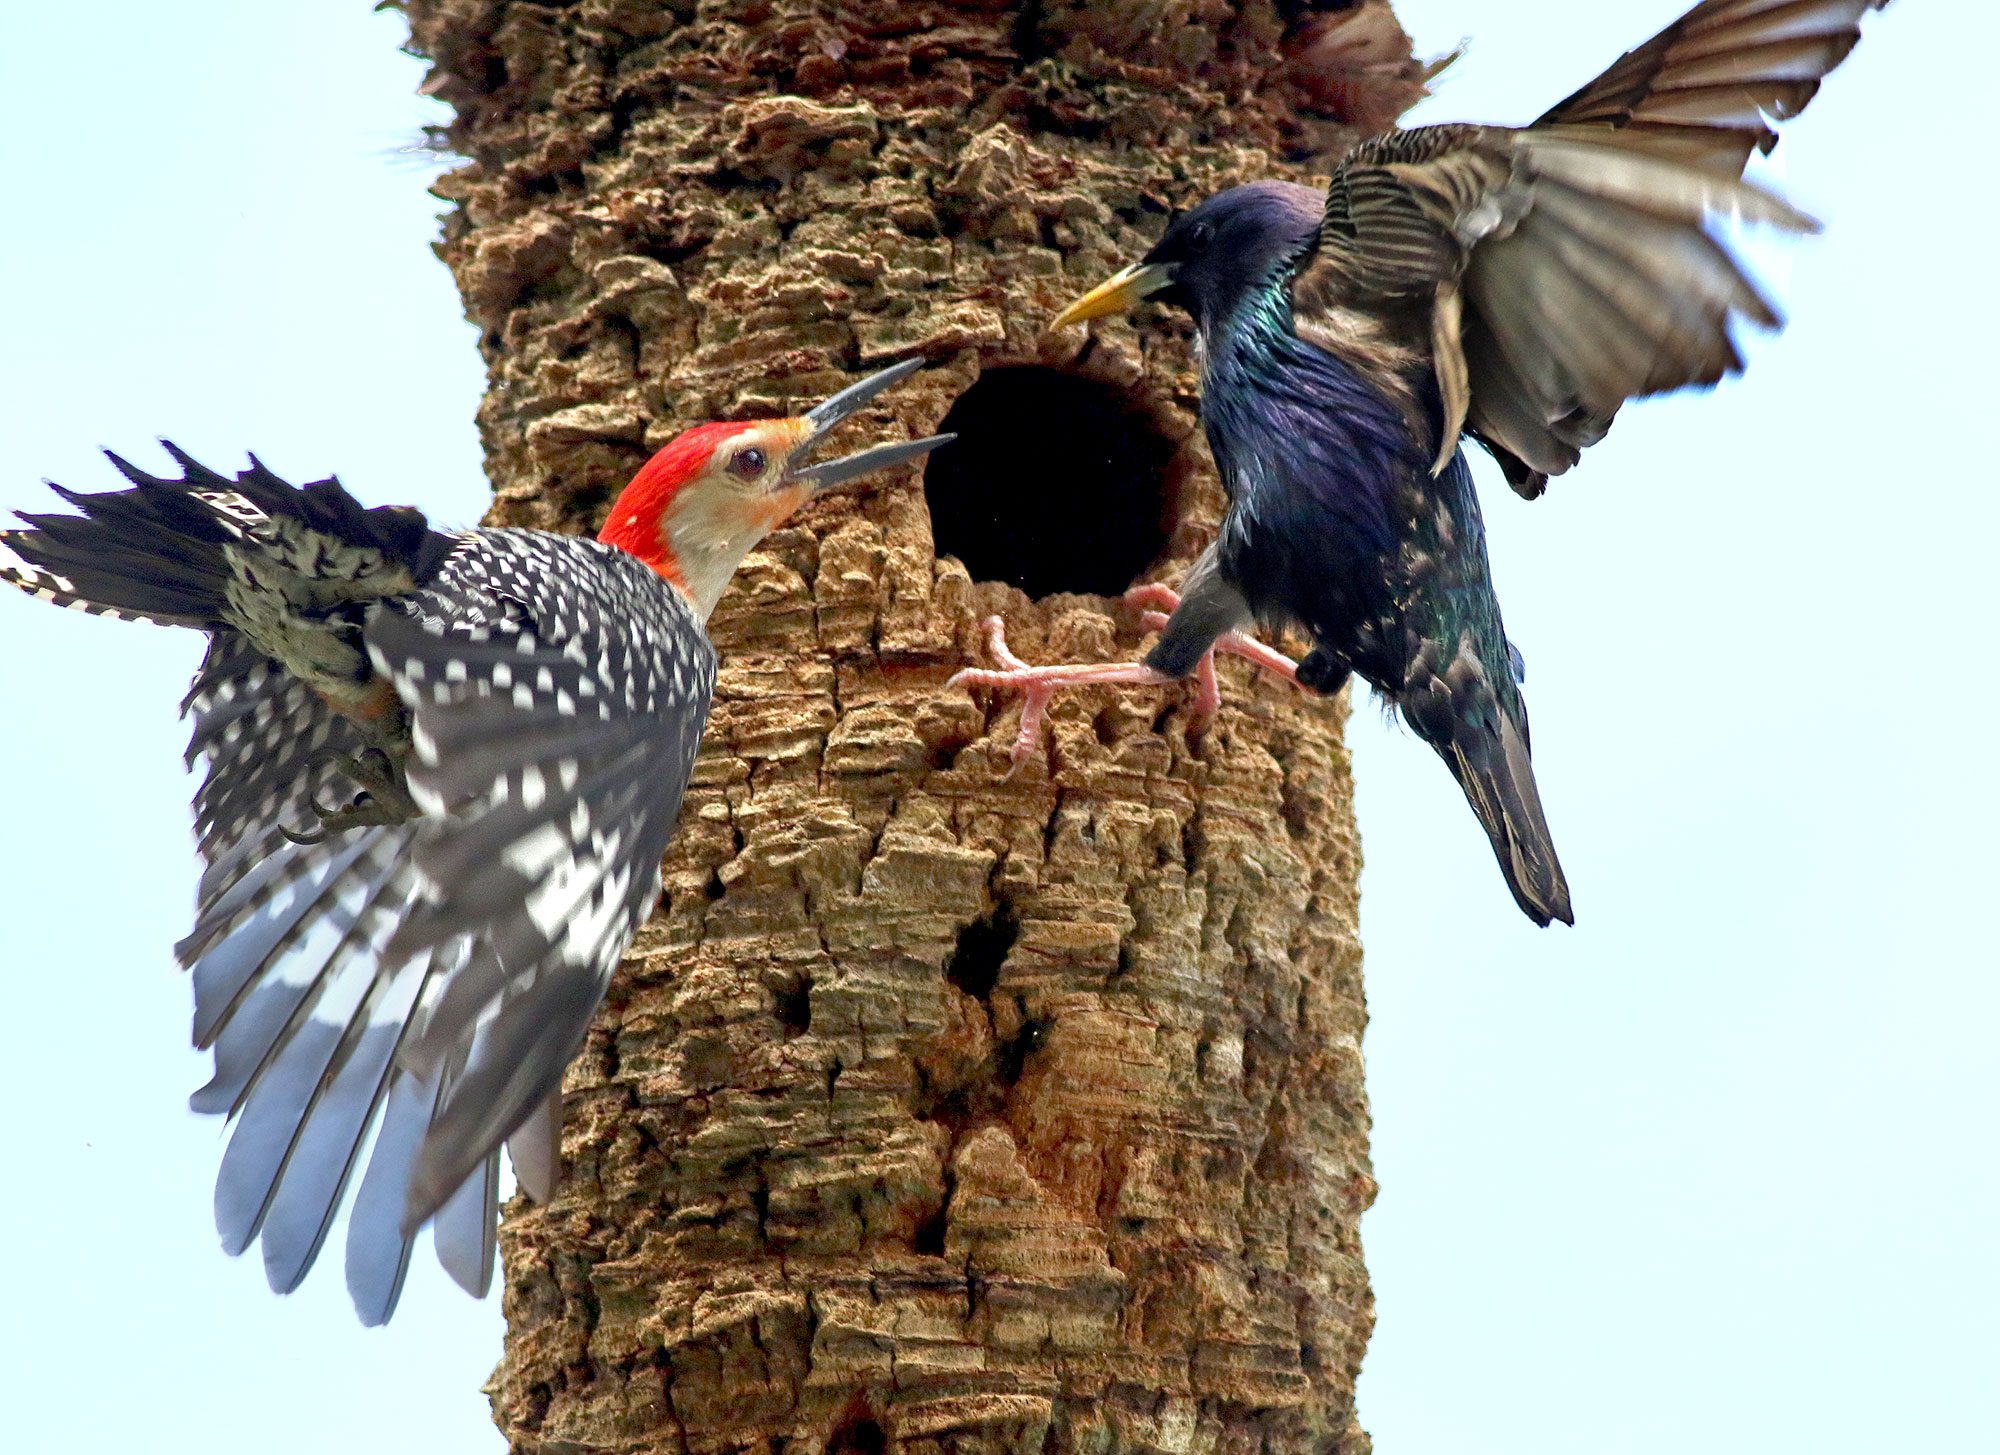 A native Red-bellied Woodpecker fights off an European Starling from the woodpecker's nest cavity. Photo by Philip Rathner via BIrdshare.